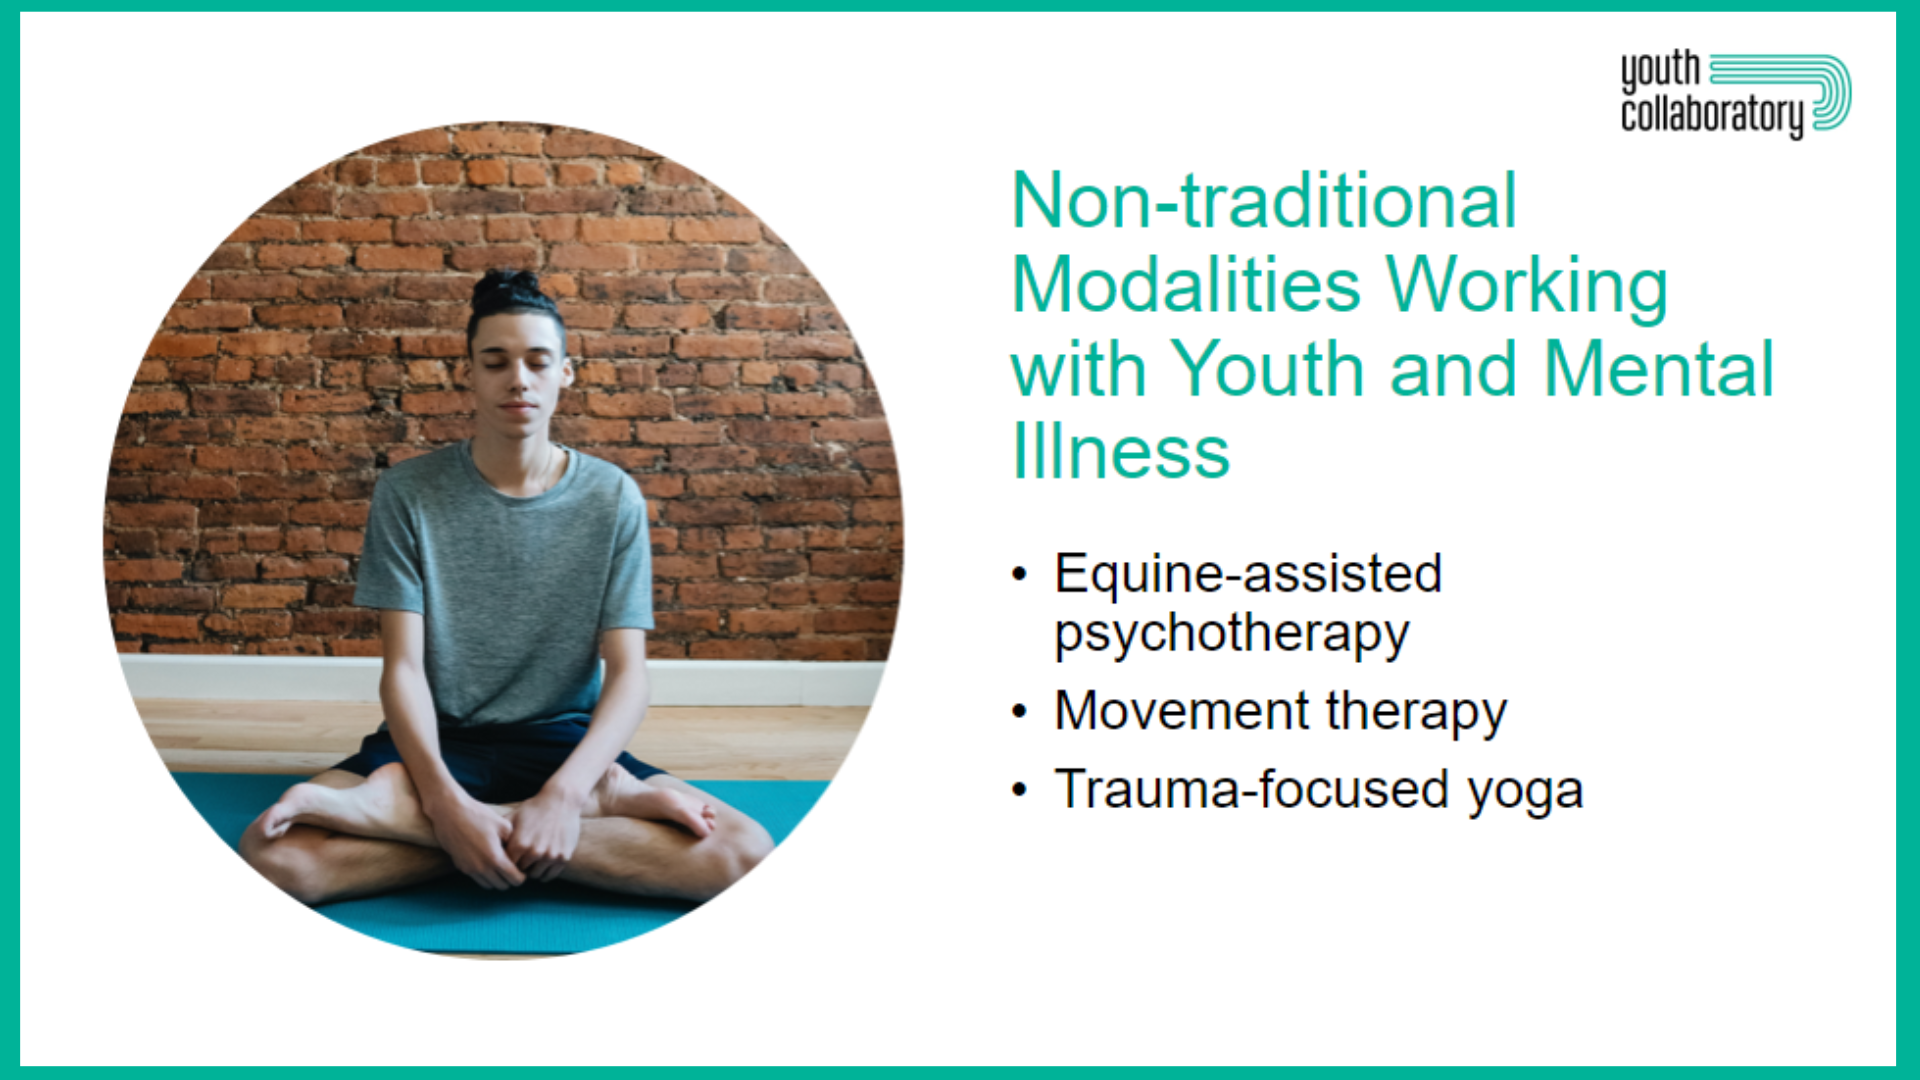 Non-traditional Modalities Working with Youth and Mental Illness